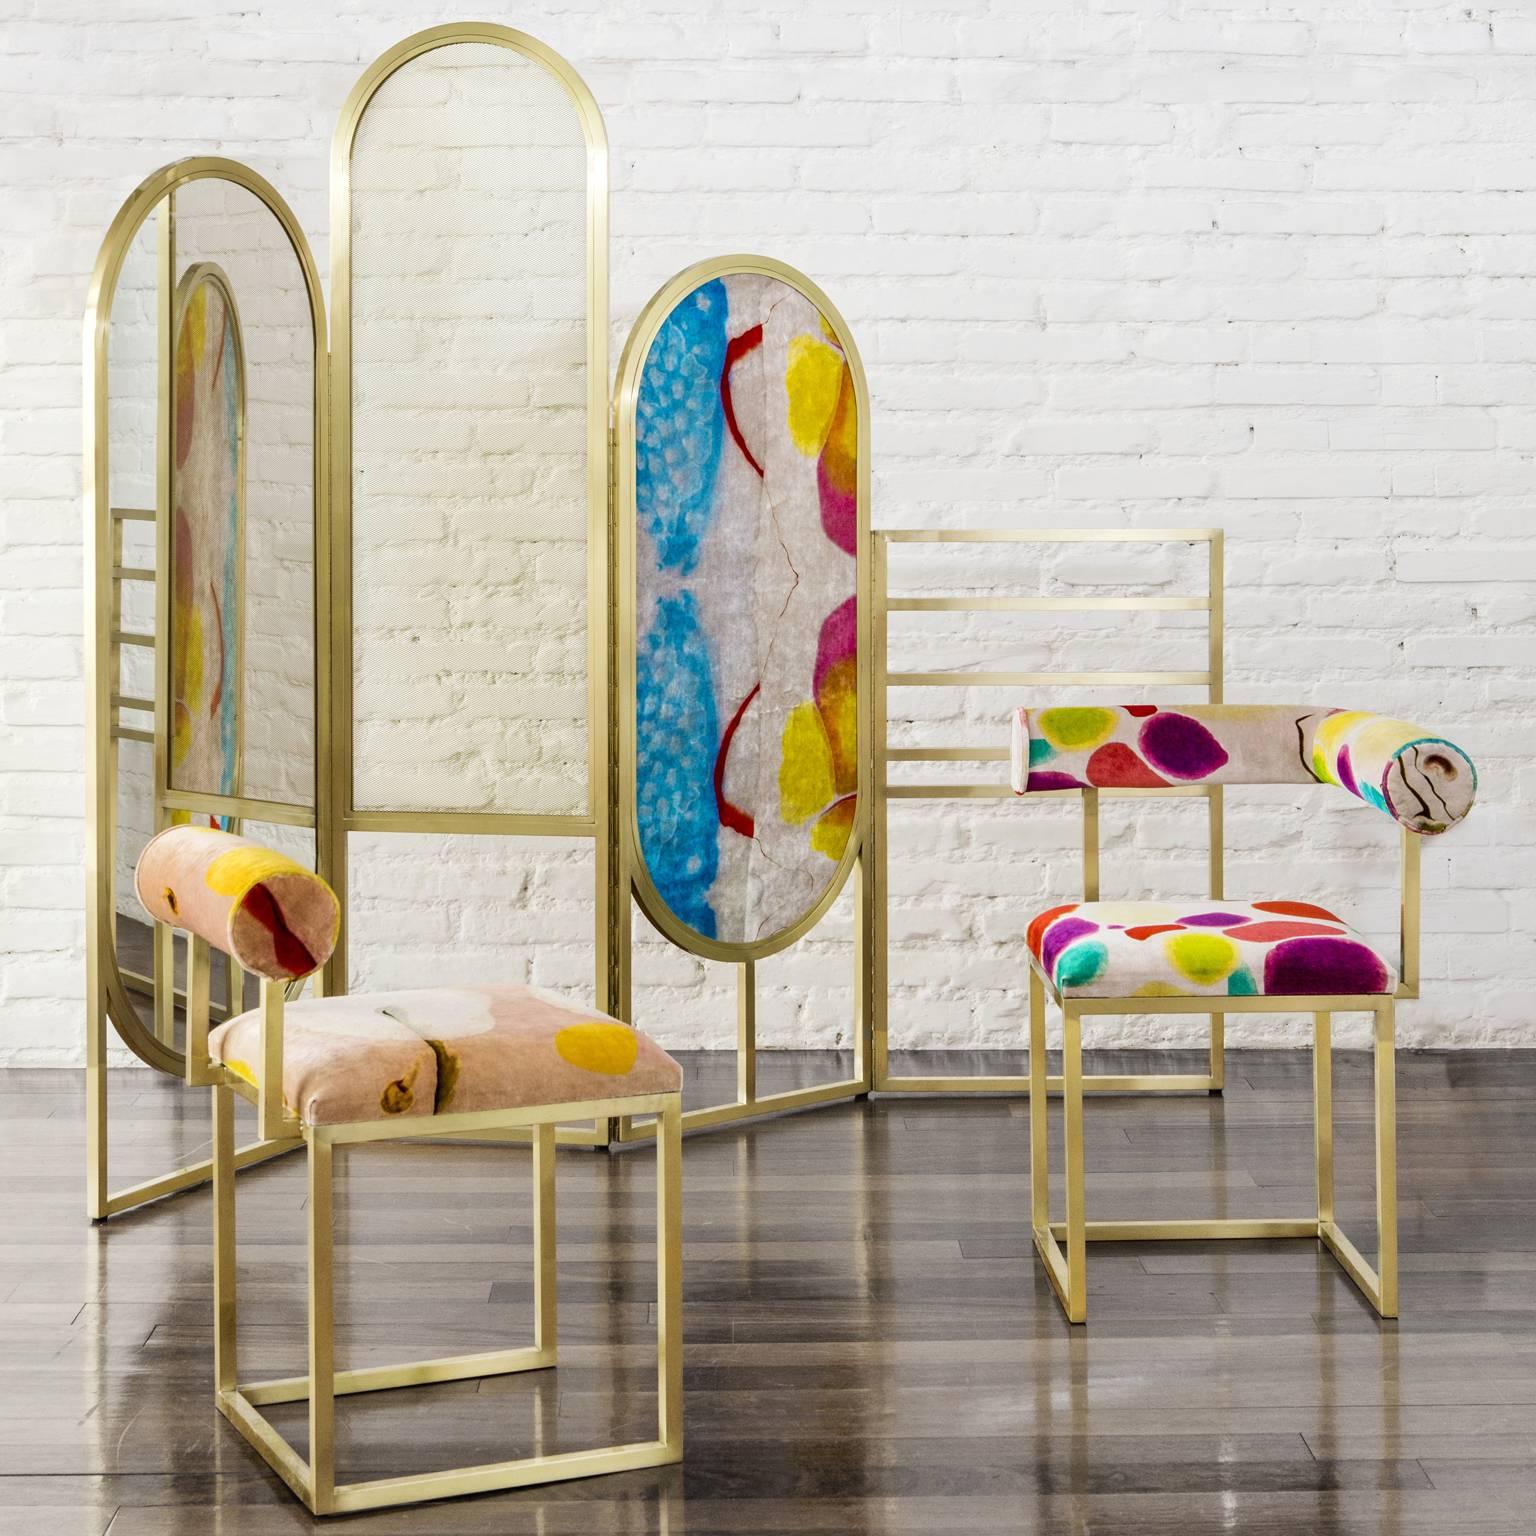 This room divider is part of the Awaiting collection, presented by Secondome during Milan Fuorisalone, 2016. It's a series of items born from the encounter between the printed silk and cotton velvet designed by the artist Coralla Maiuri, and the